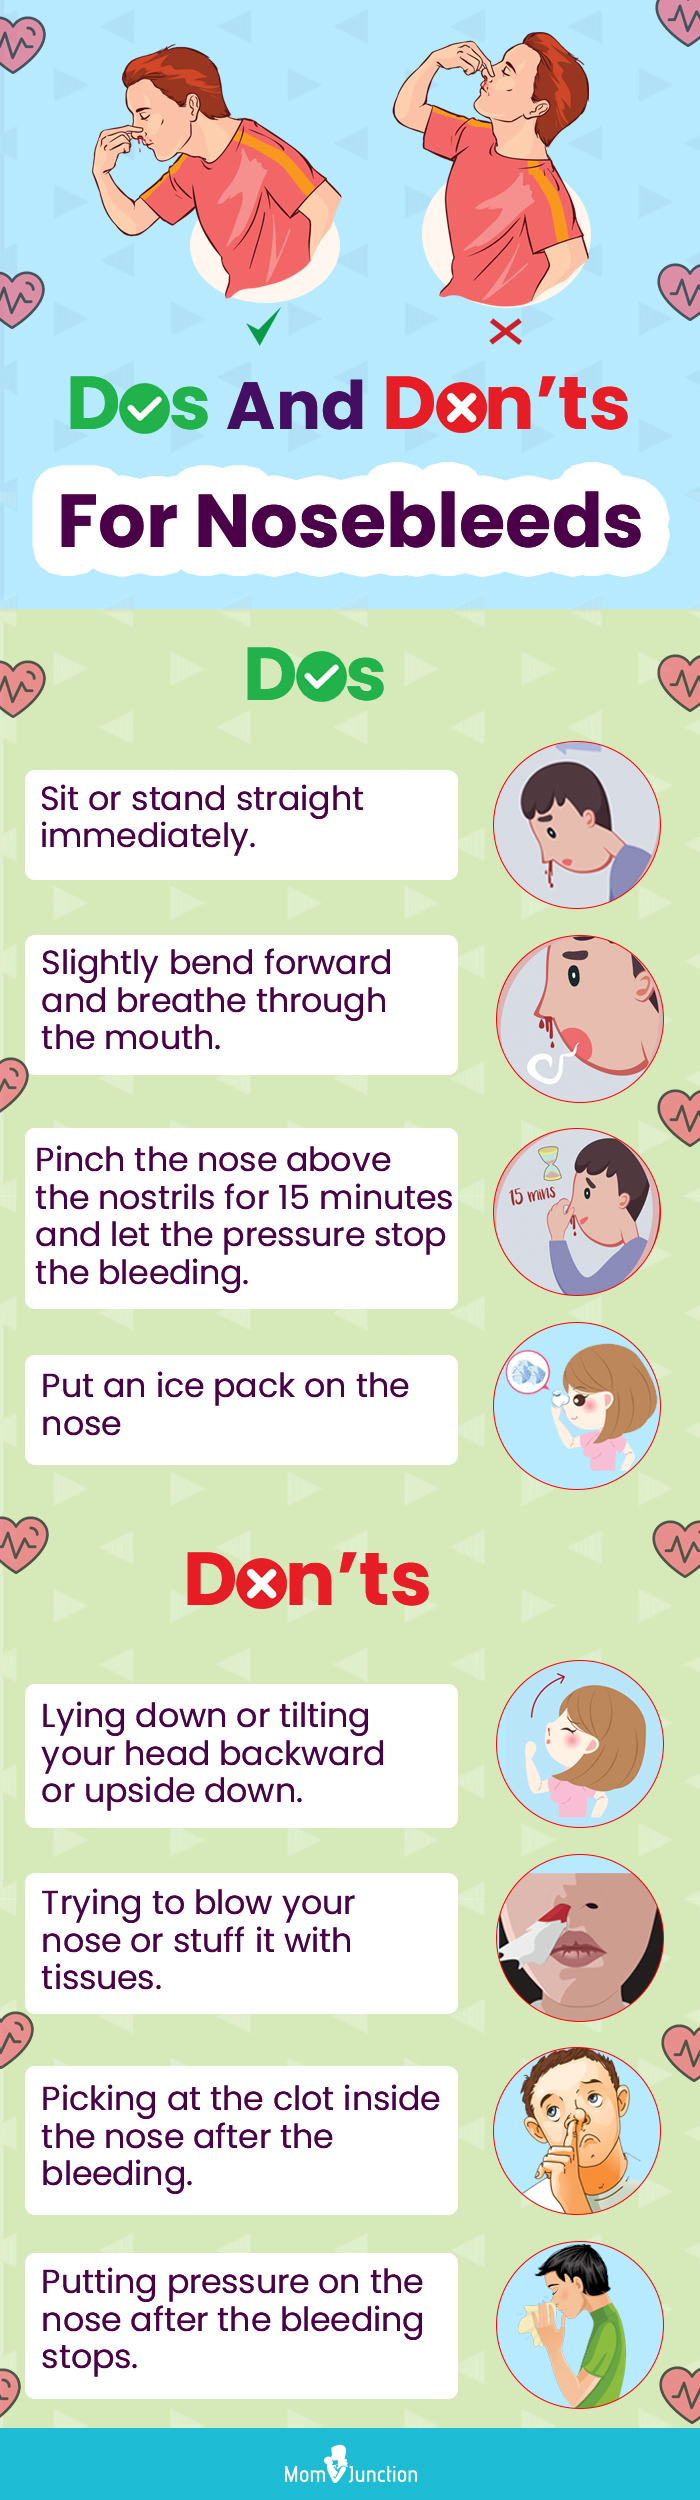 dos and don t for nosebleeds (infographic)